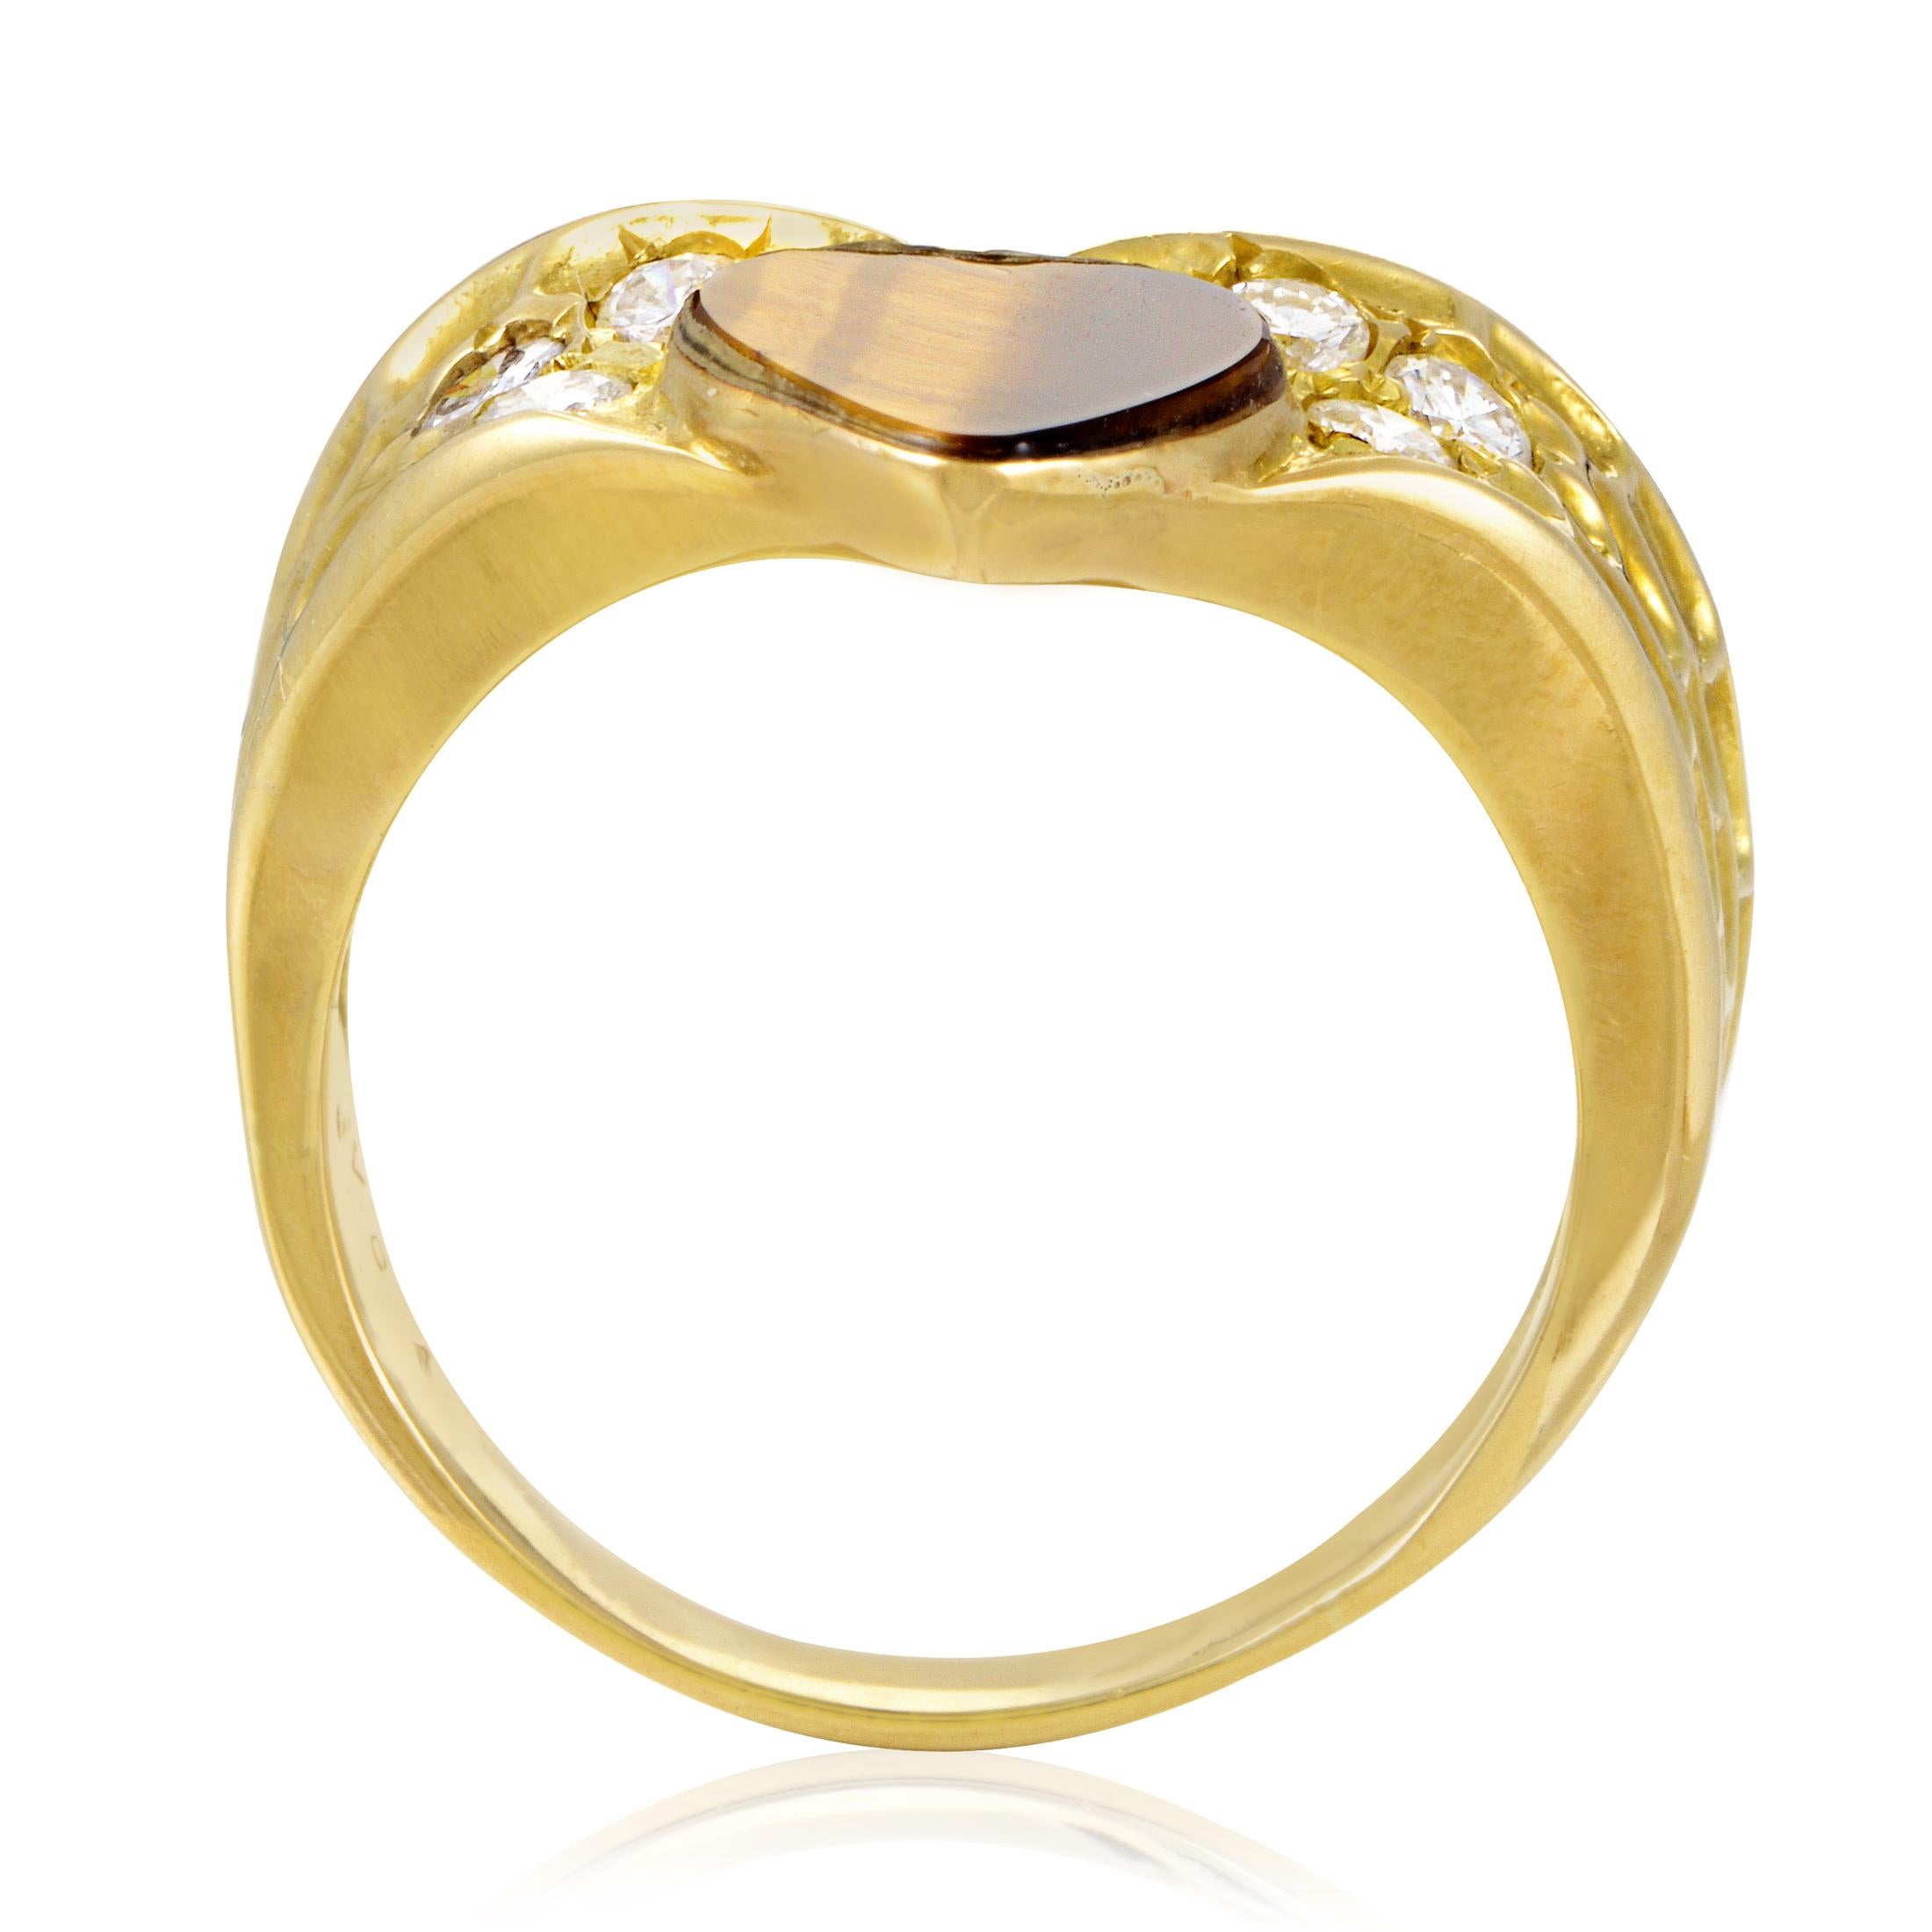 Neatly cut into a romantic shape of a heart while fascinatingly exhibiting its intriguing gradated color, the splendid tiger?s eye stone takes the central spot of this gorgeous 18K yellow gold ring from Van Cleef& Arpels that also boasts glistening